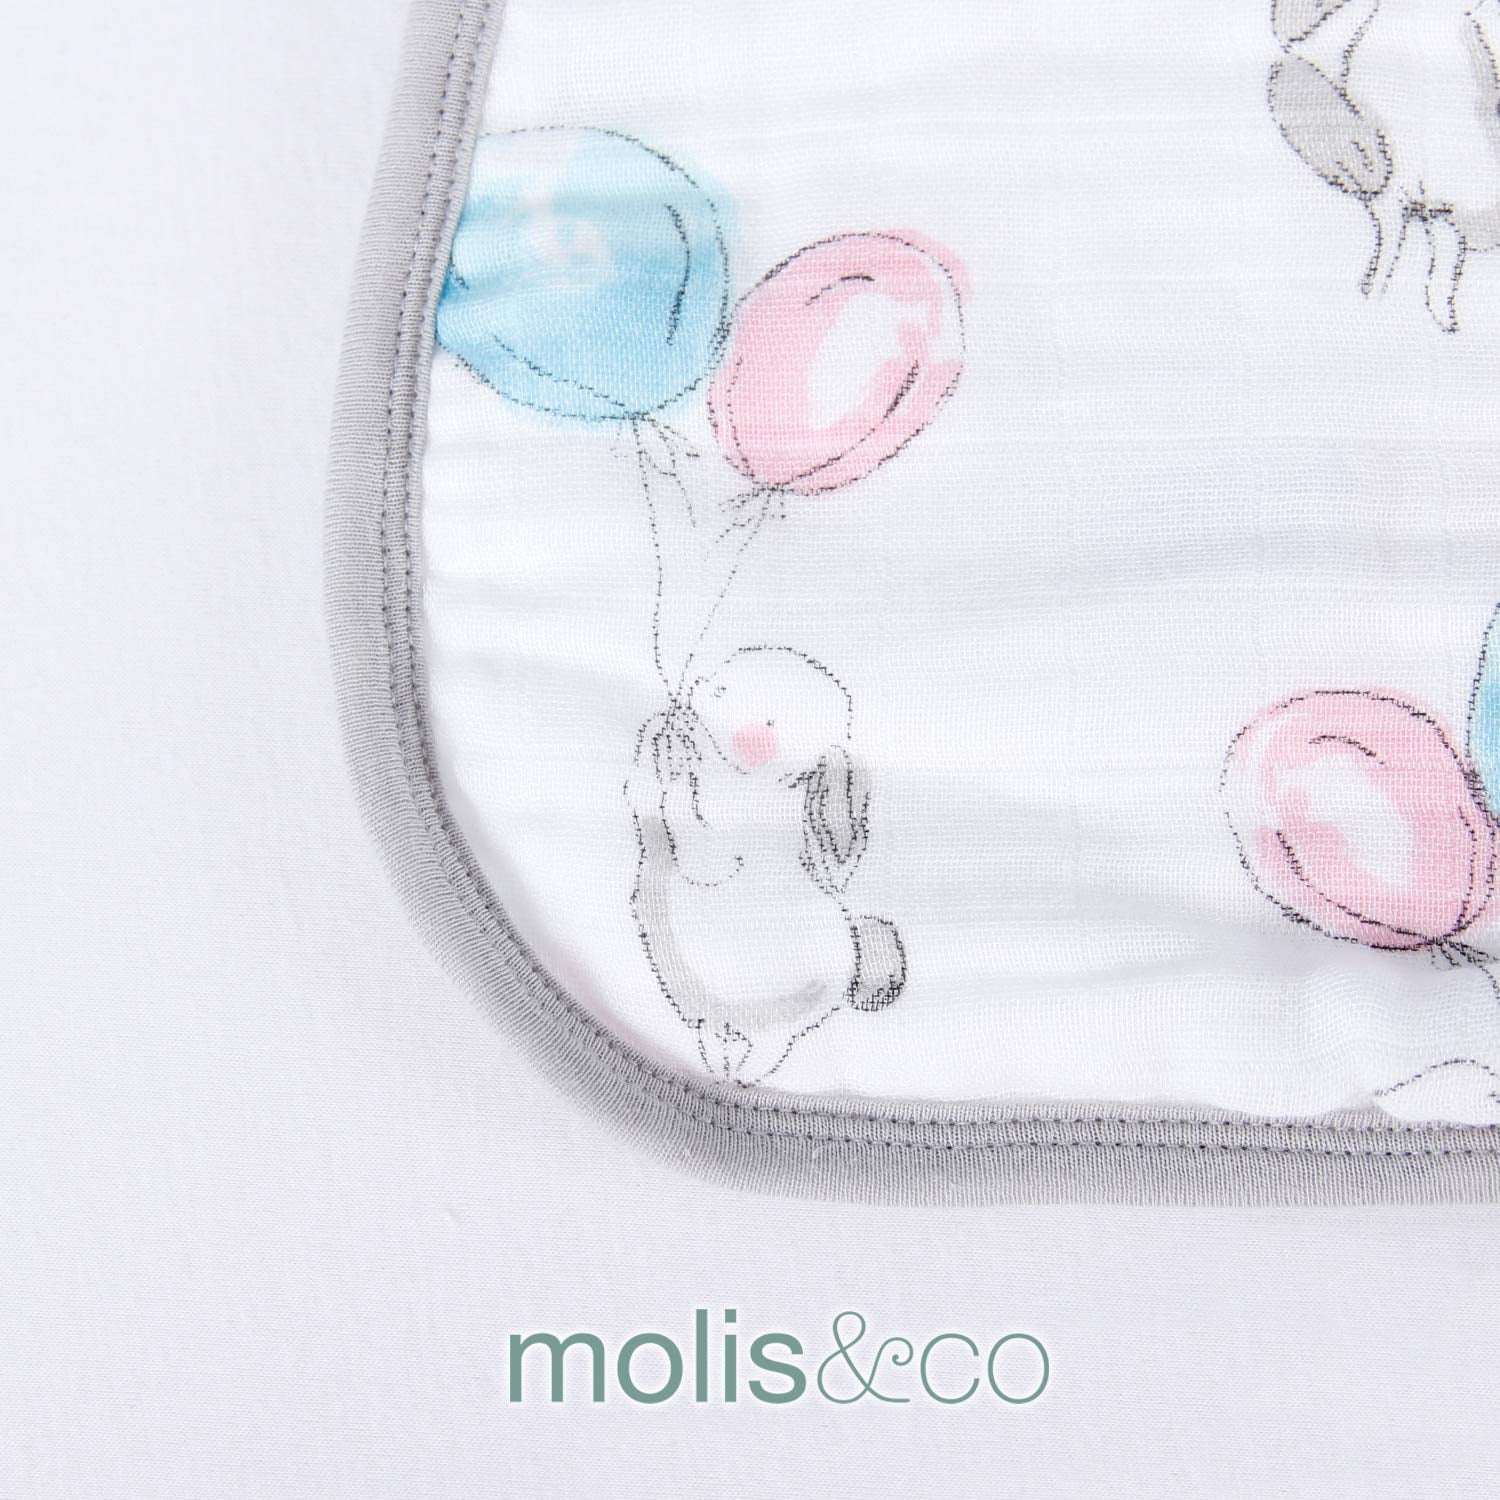 Molis & co Premium Muslin Baby Sleeping Bag and Sack, 2.5 TOG,Super Soft  and Warm Unisex Wearable Blanket, 18-36 Months. 35.8, Ideal for Winter.